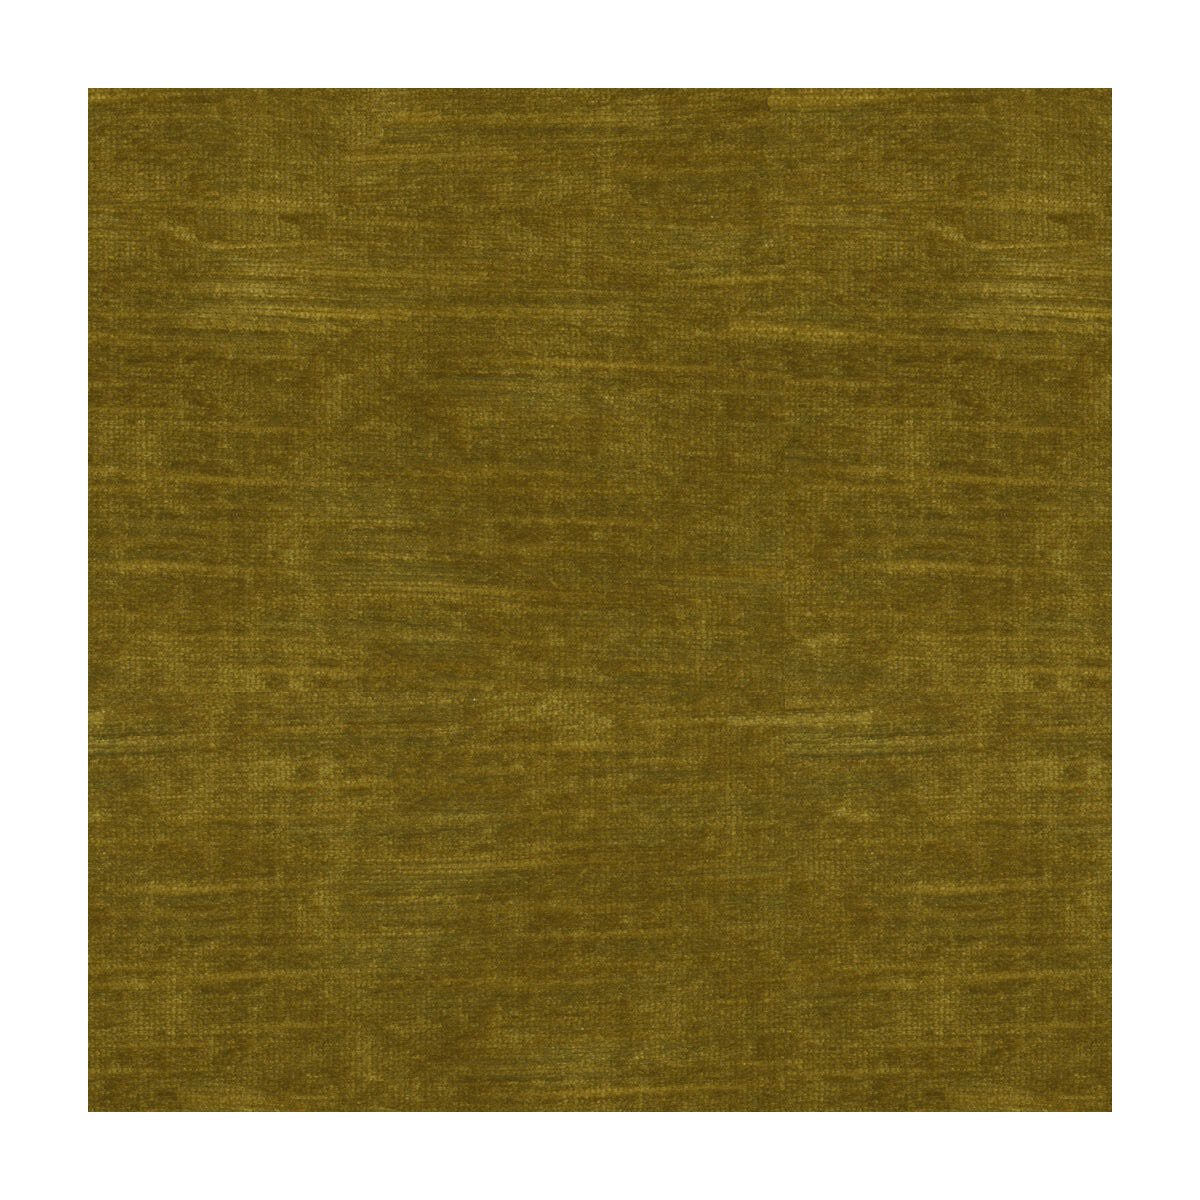 High Impact fabric in mustard color - pattern 34329.130.0 - by Kravet Couture